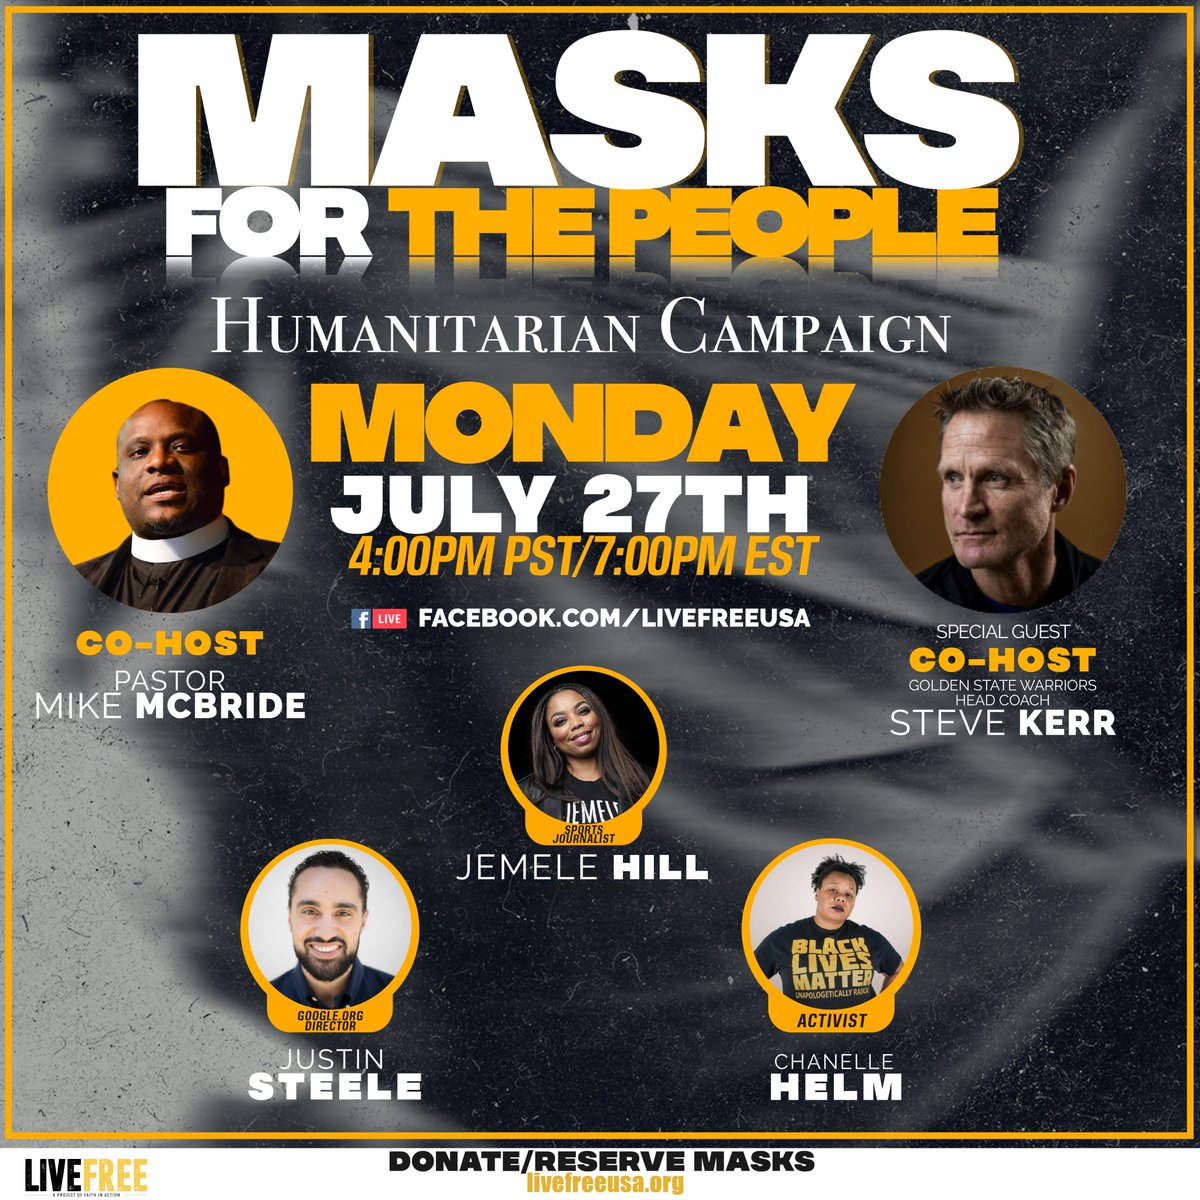 HAPPENING TODAY AT 4 p.m. PT / 7 p.m. ET: #MasksForThePeople will be LIVE with @impastormike_ and @SteveKerr! Special guests include @jemelehill, @justinrsteele, and @ChanelleHelm!! Don't forget to donate and reserve masks at livefreeusa.org